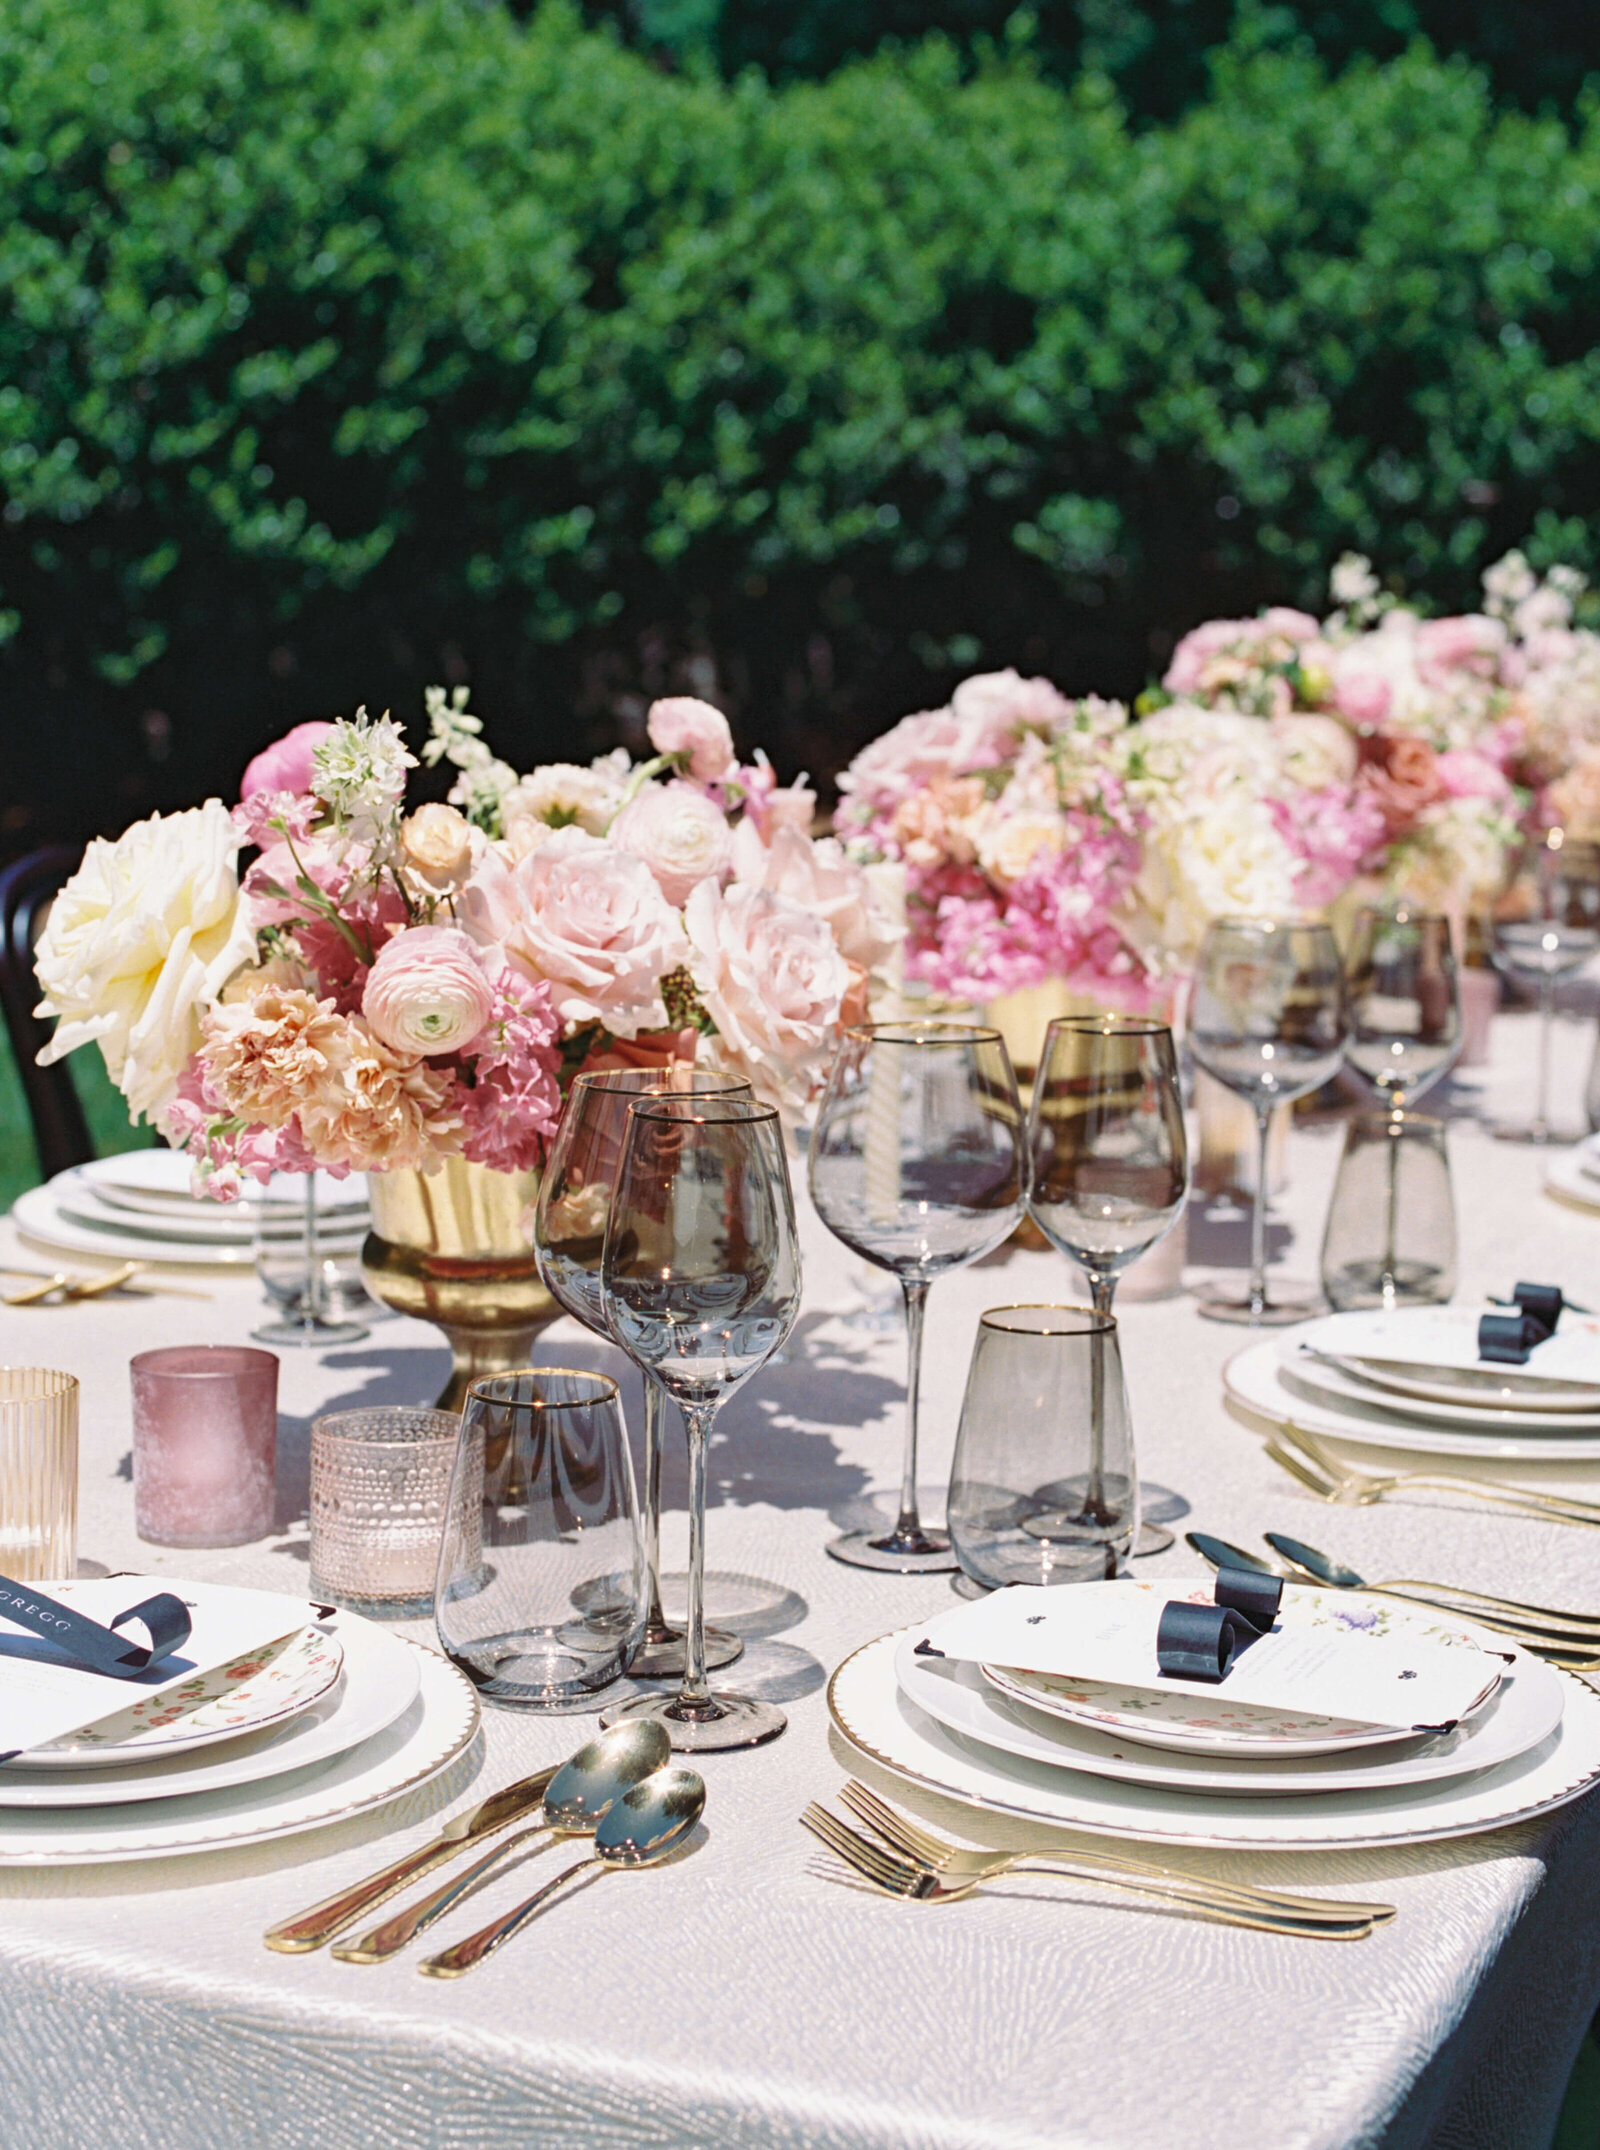 A beautifully set table with pink flowers acts as the head table for the bride and groom and their bridal party